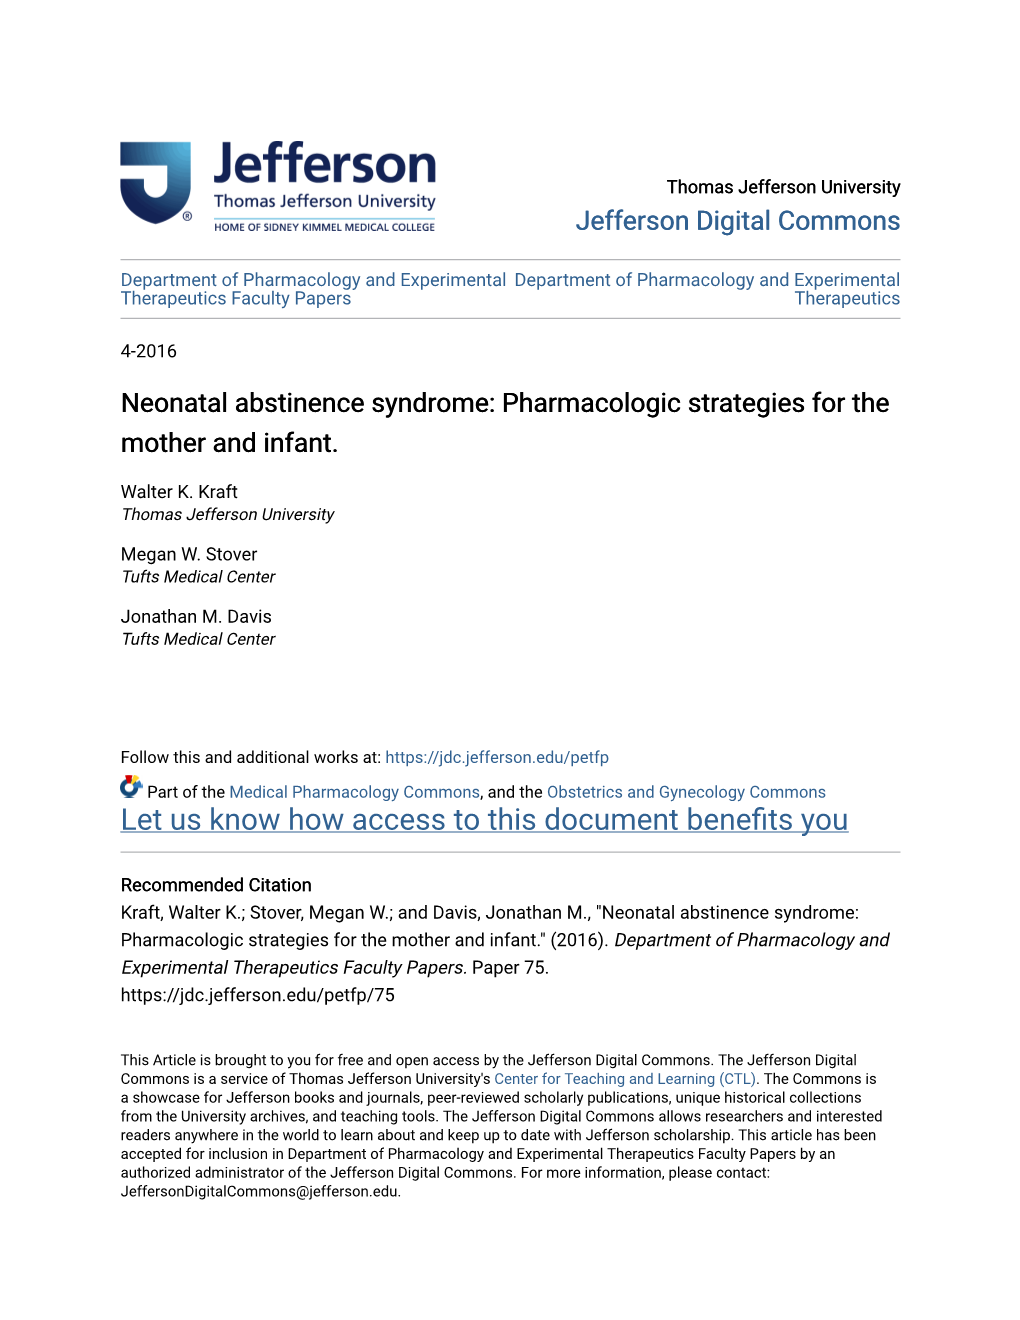 Neonatal Abstinence Syndrome: Pharmacologic Strategies for the Mother and Infant